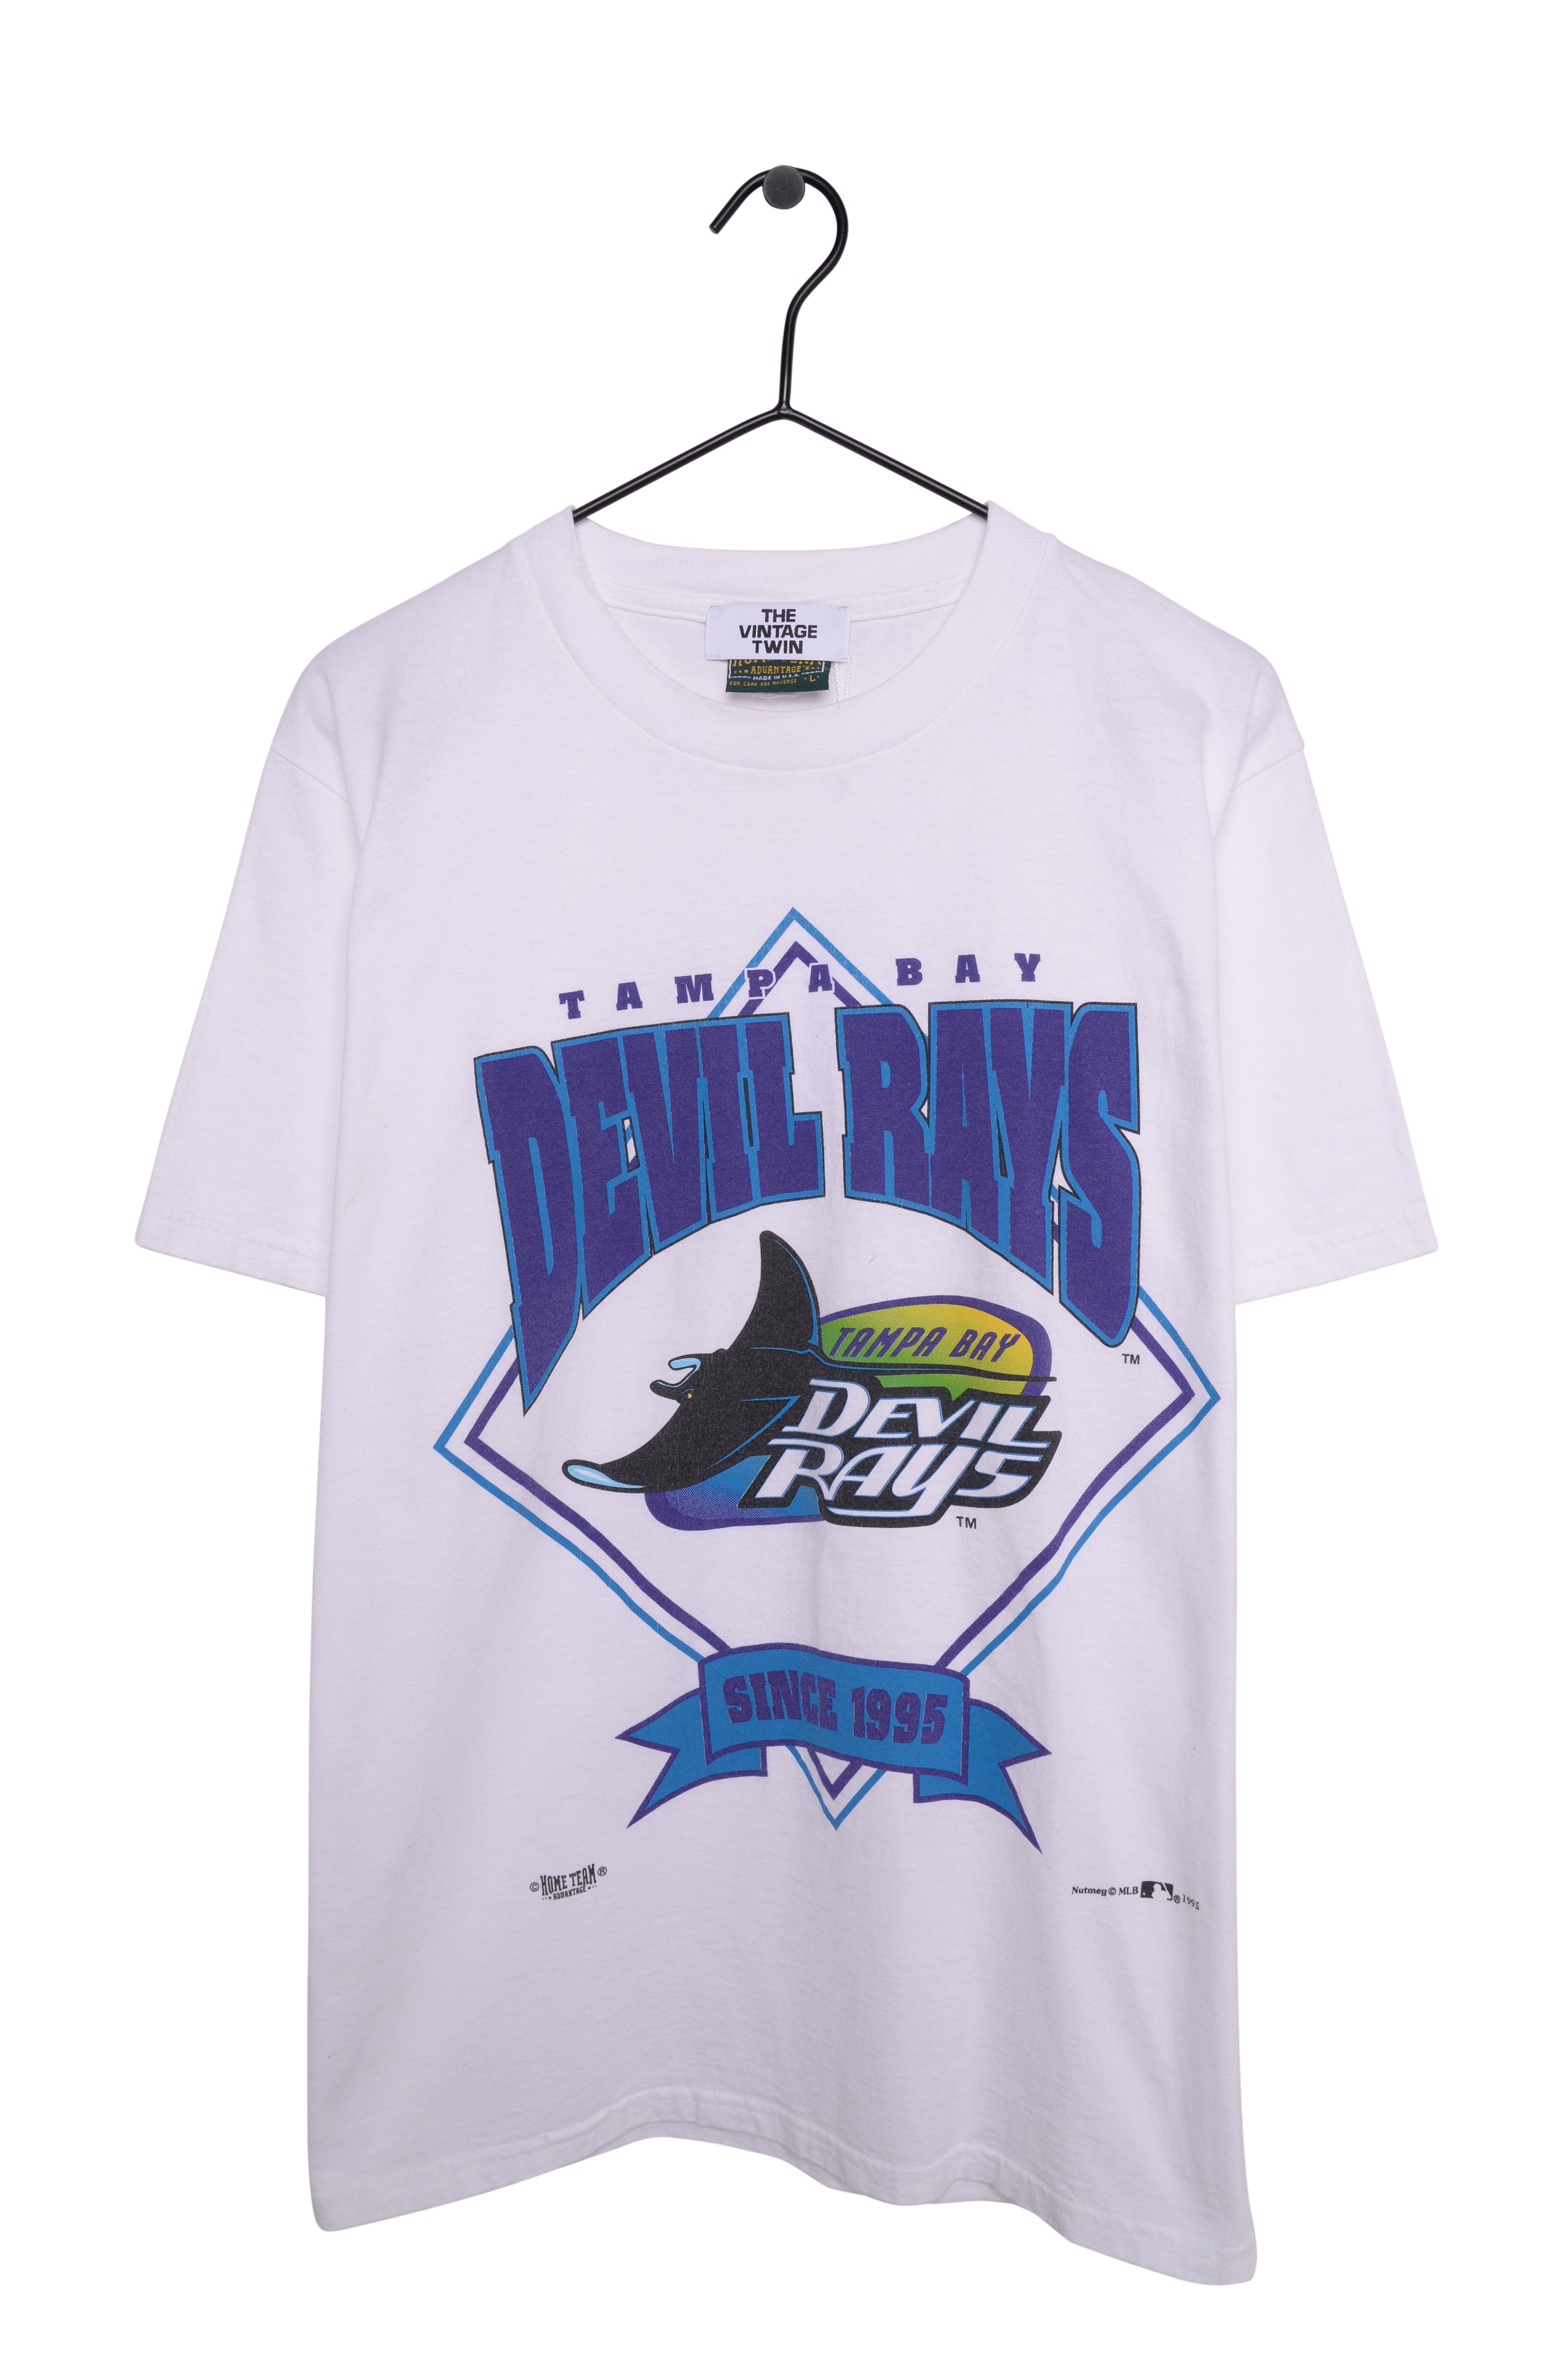 Tampa Bay Rays Devil Rays shirt, hoodie, sweater and v-neck t-shirt